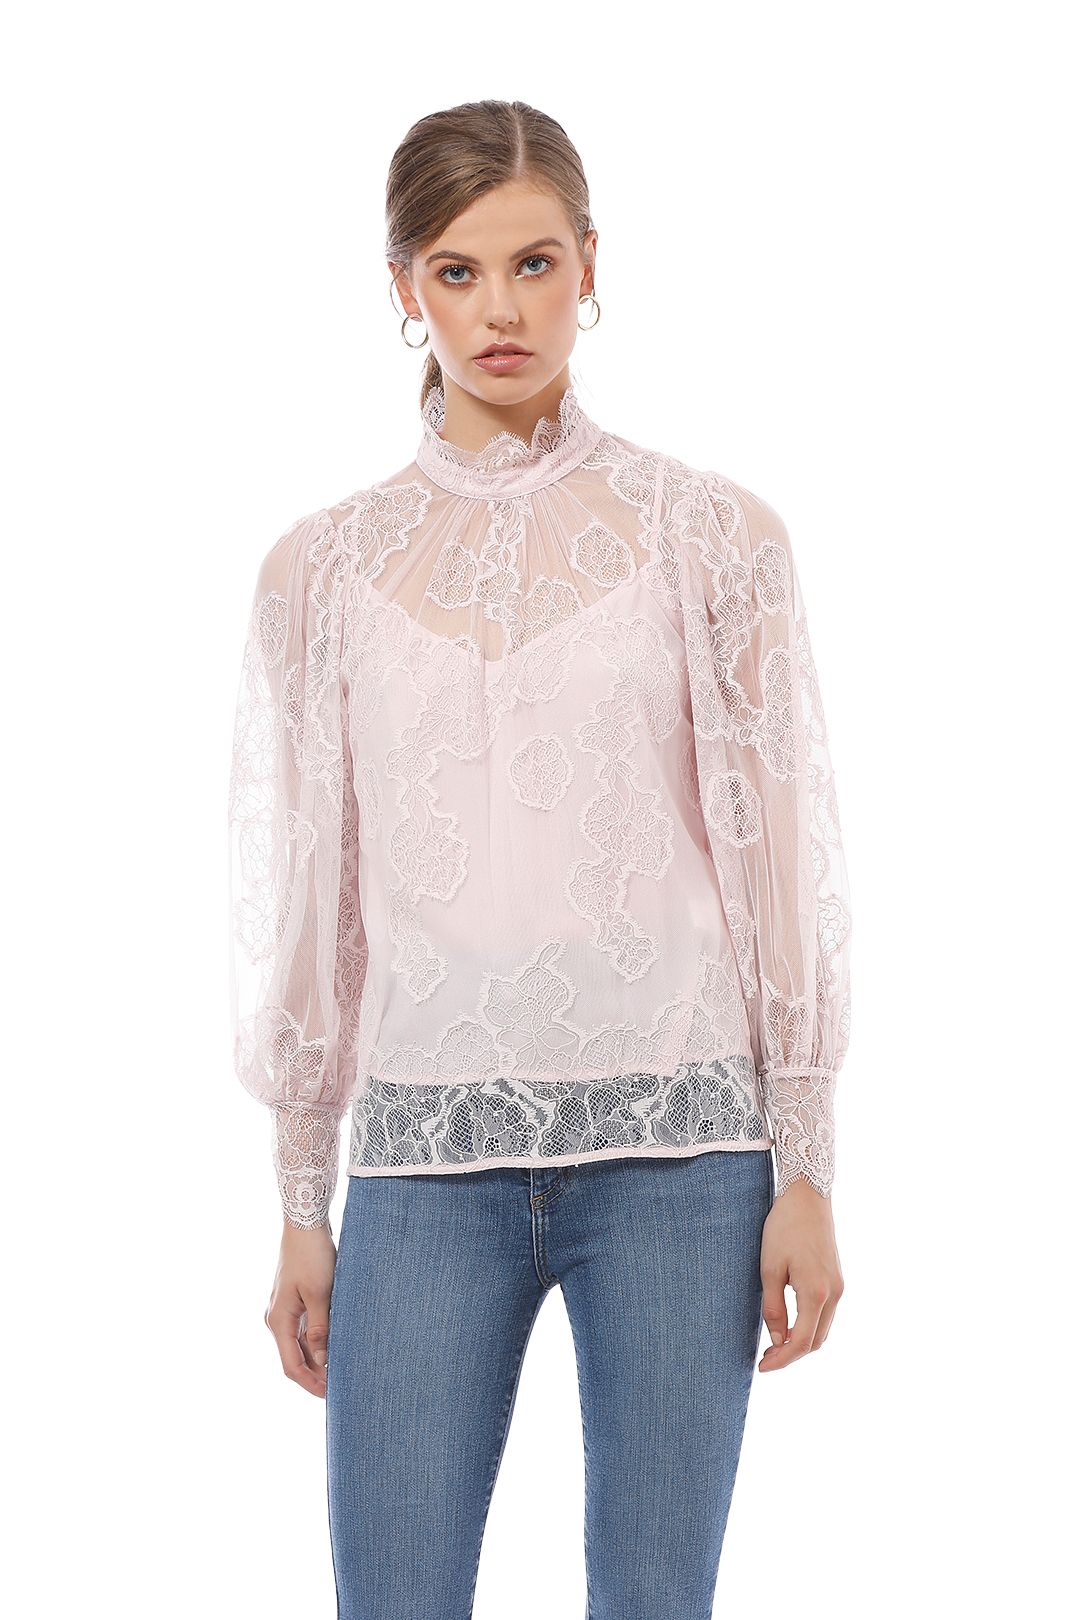 Witchery - Lace Balloon Sleeve Blouse - Pink - Close Up